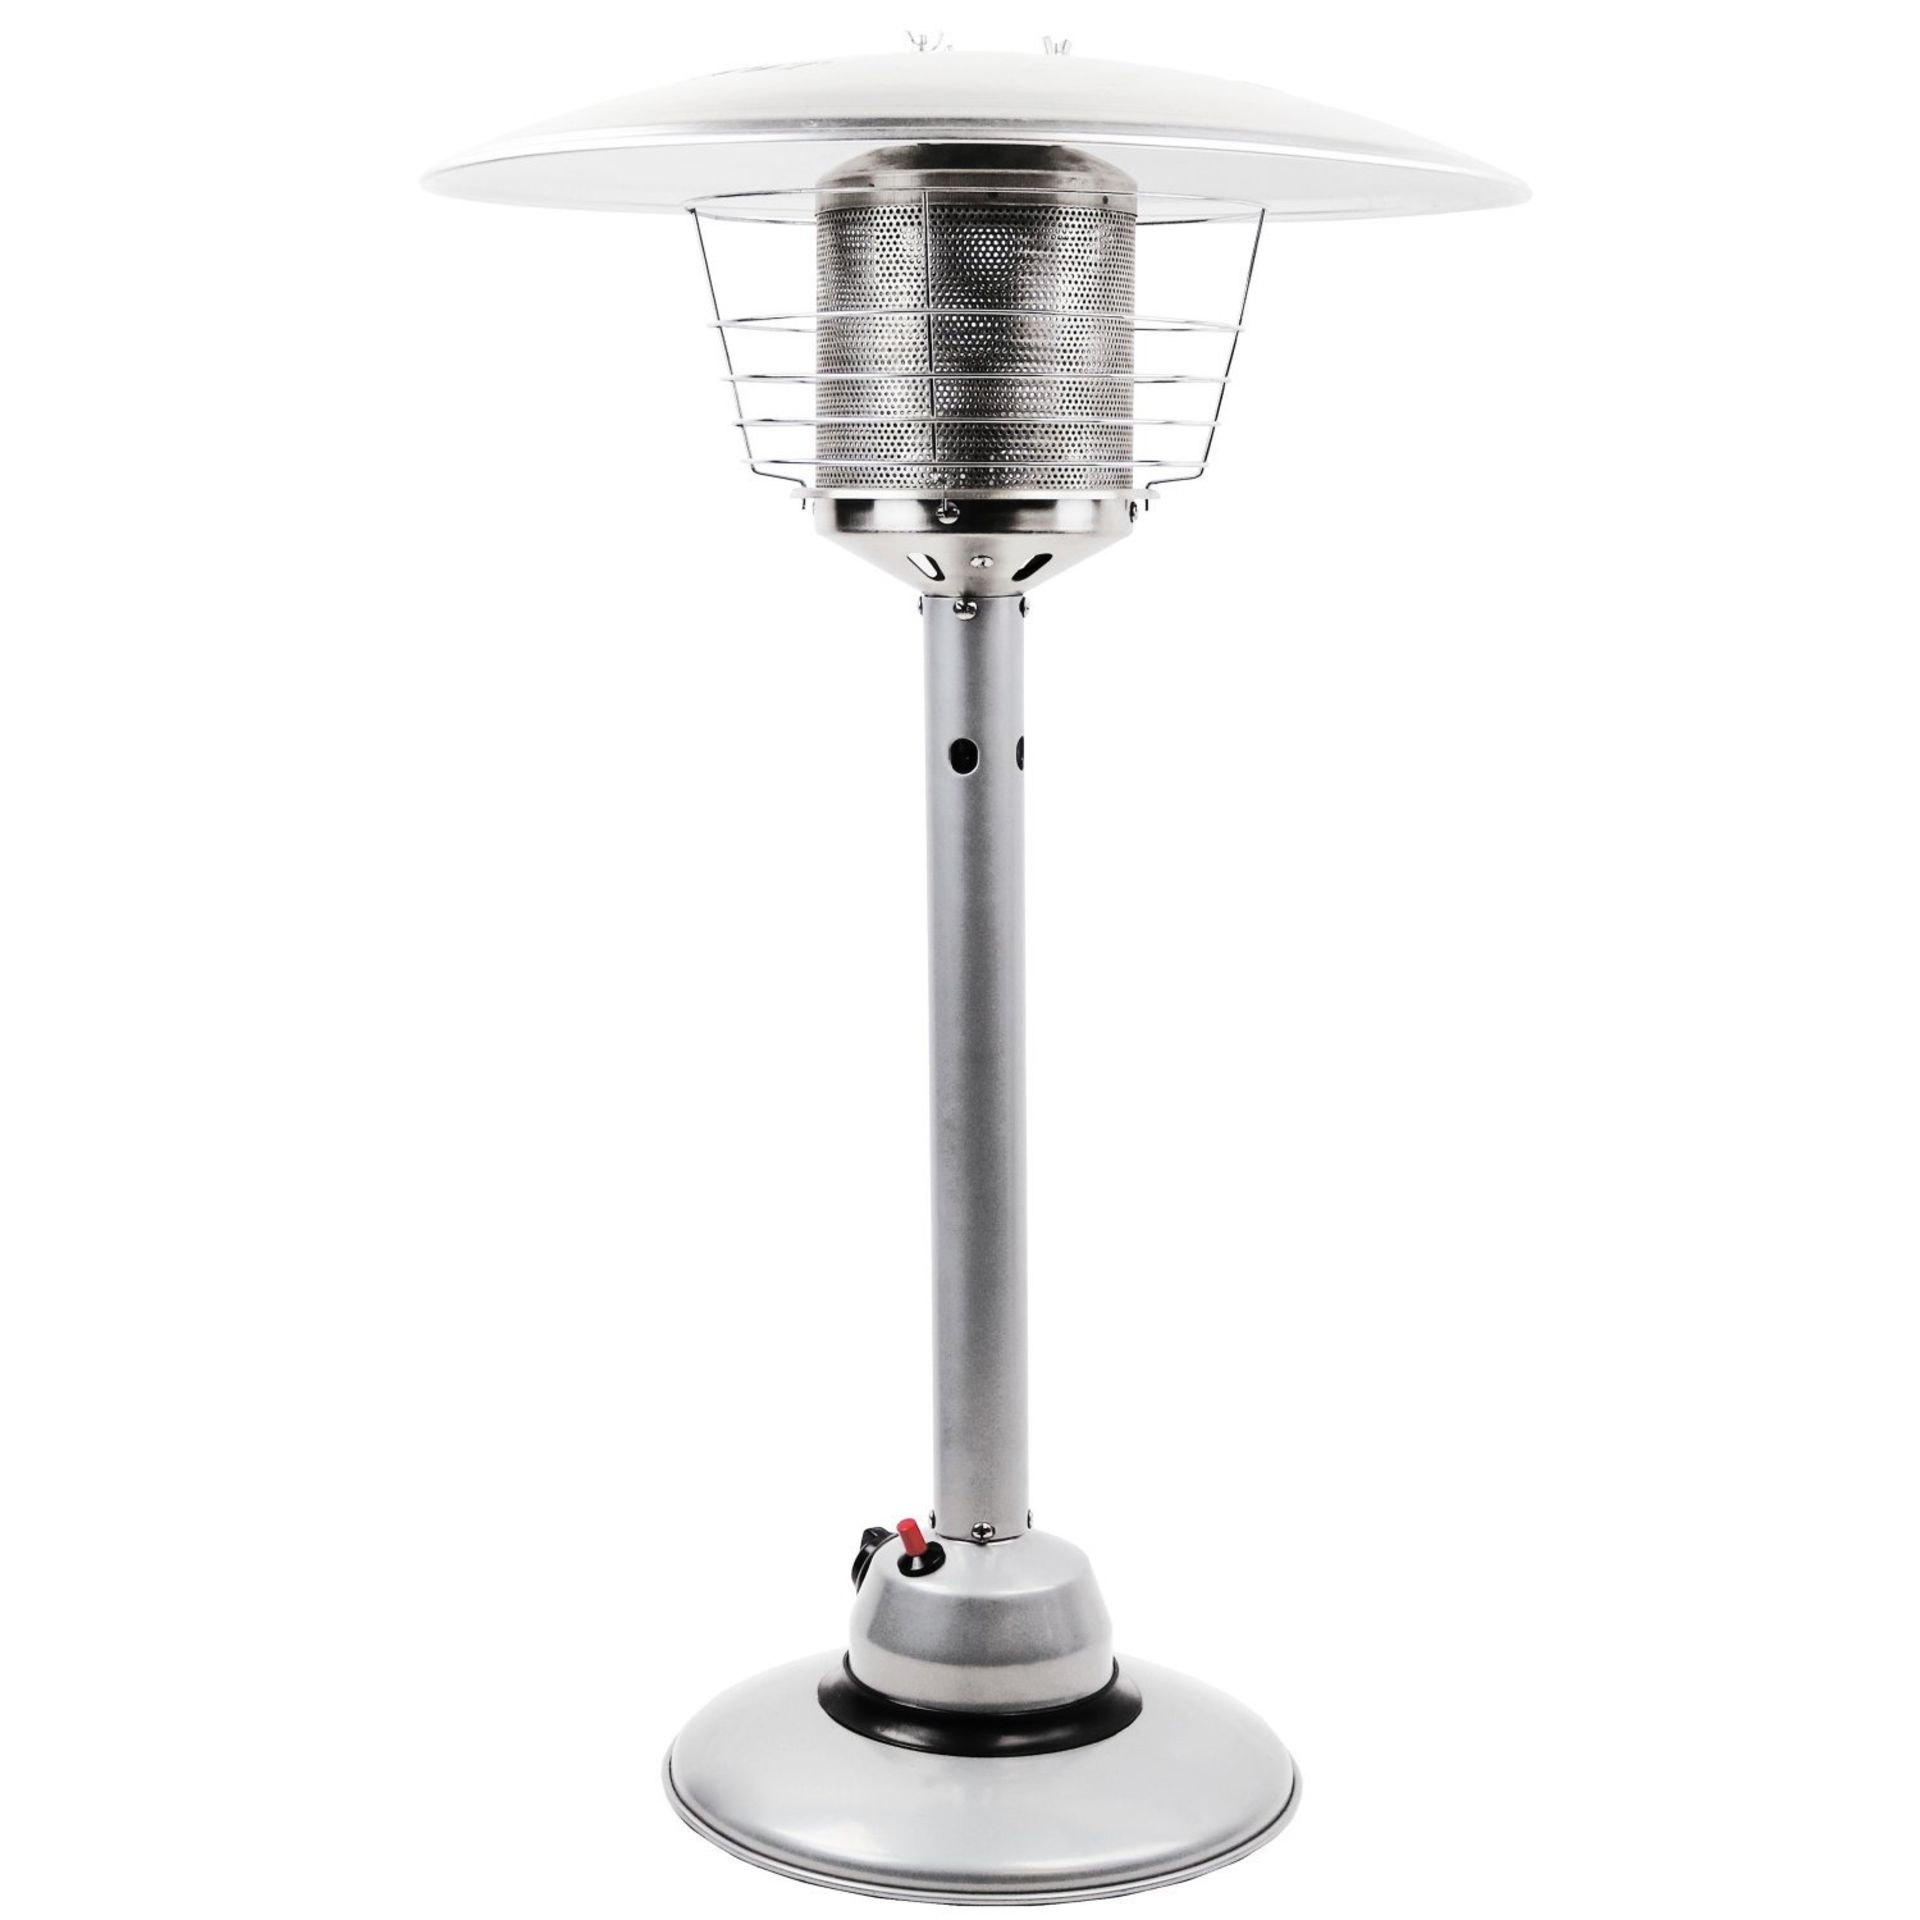 (RU40) Table Top 4KW Outdoor Gas Patio Heater c/w Hose & Regulator One of the most powerful ...